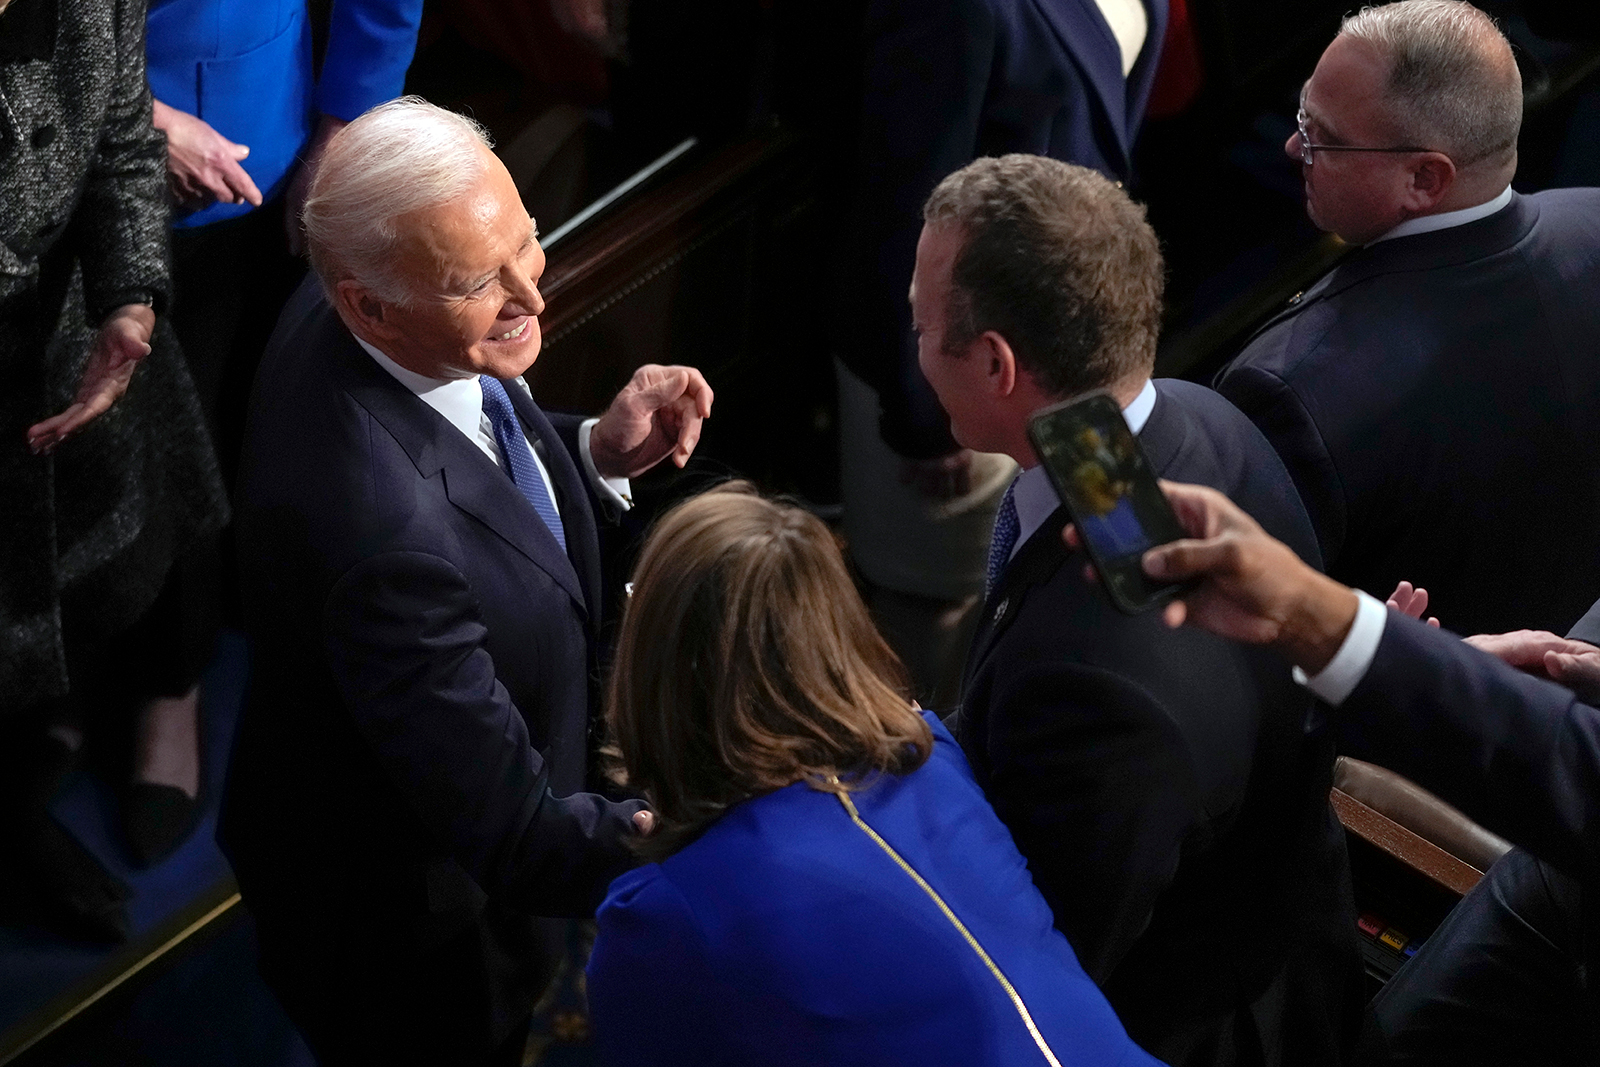 President Joe Biden greets people as he arrives in the House chamber to deliver the State of the Union address.